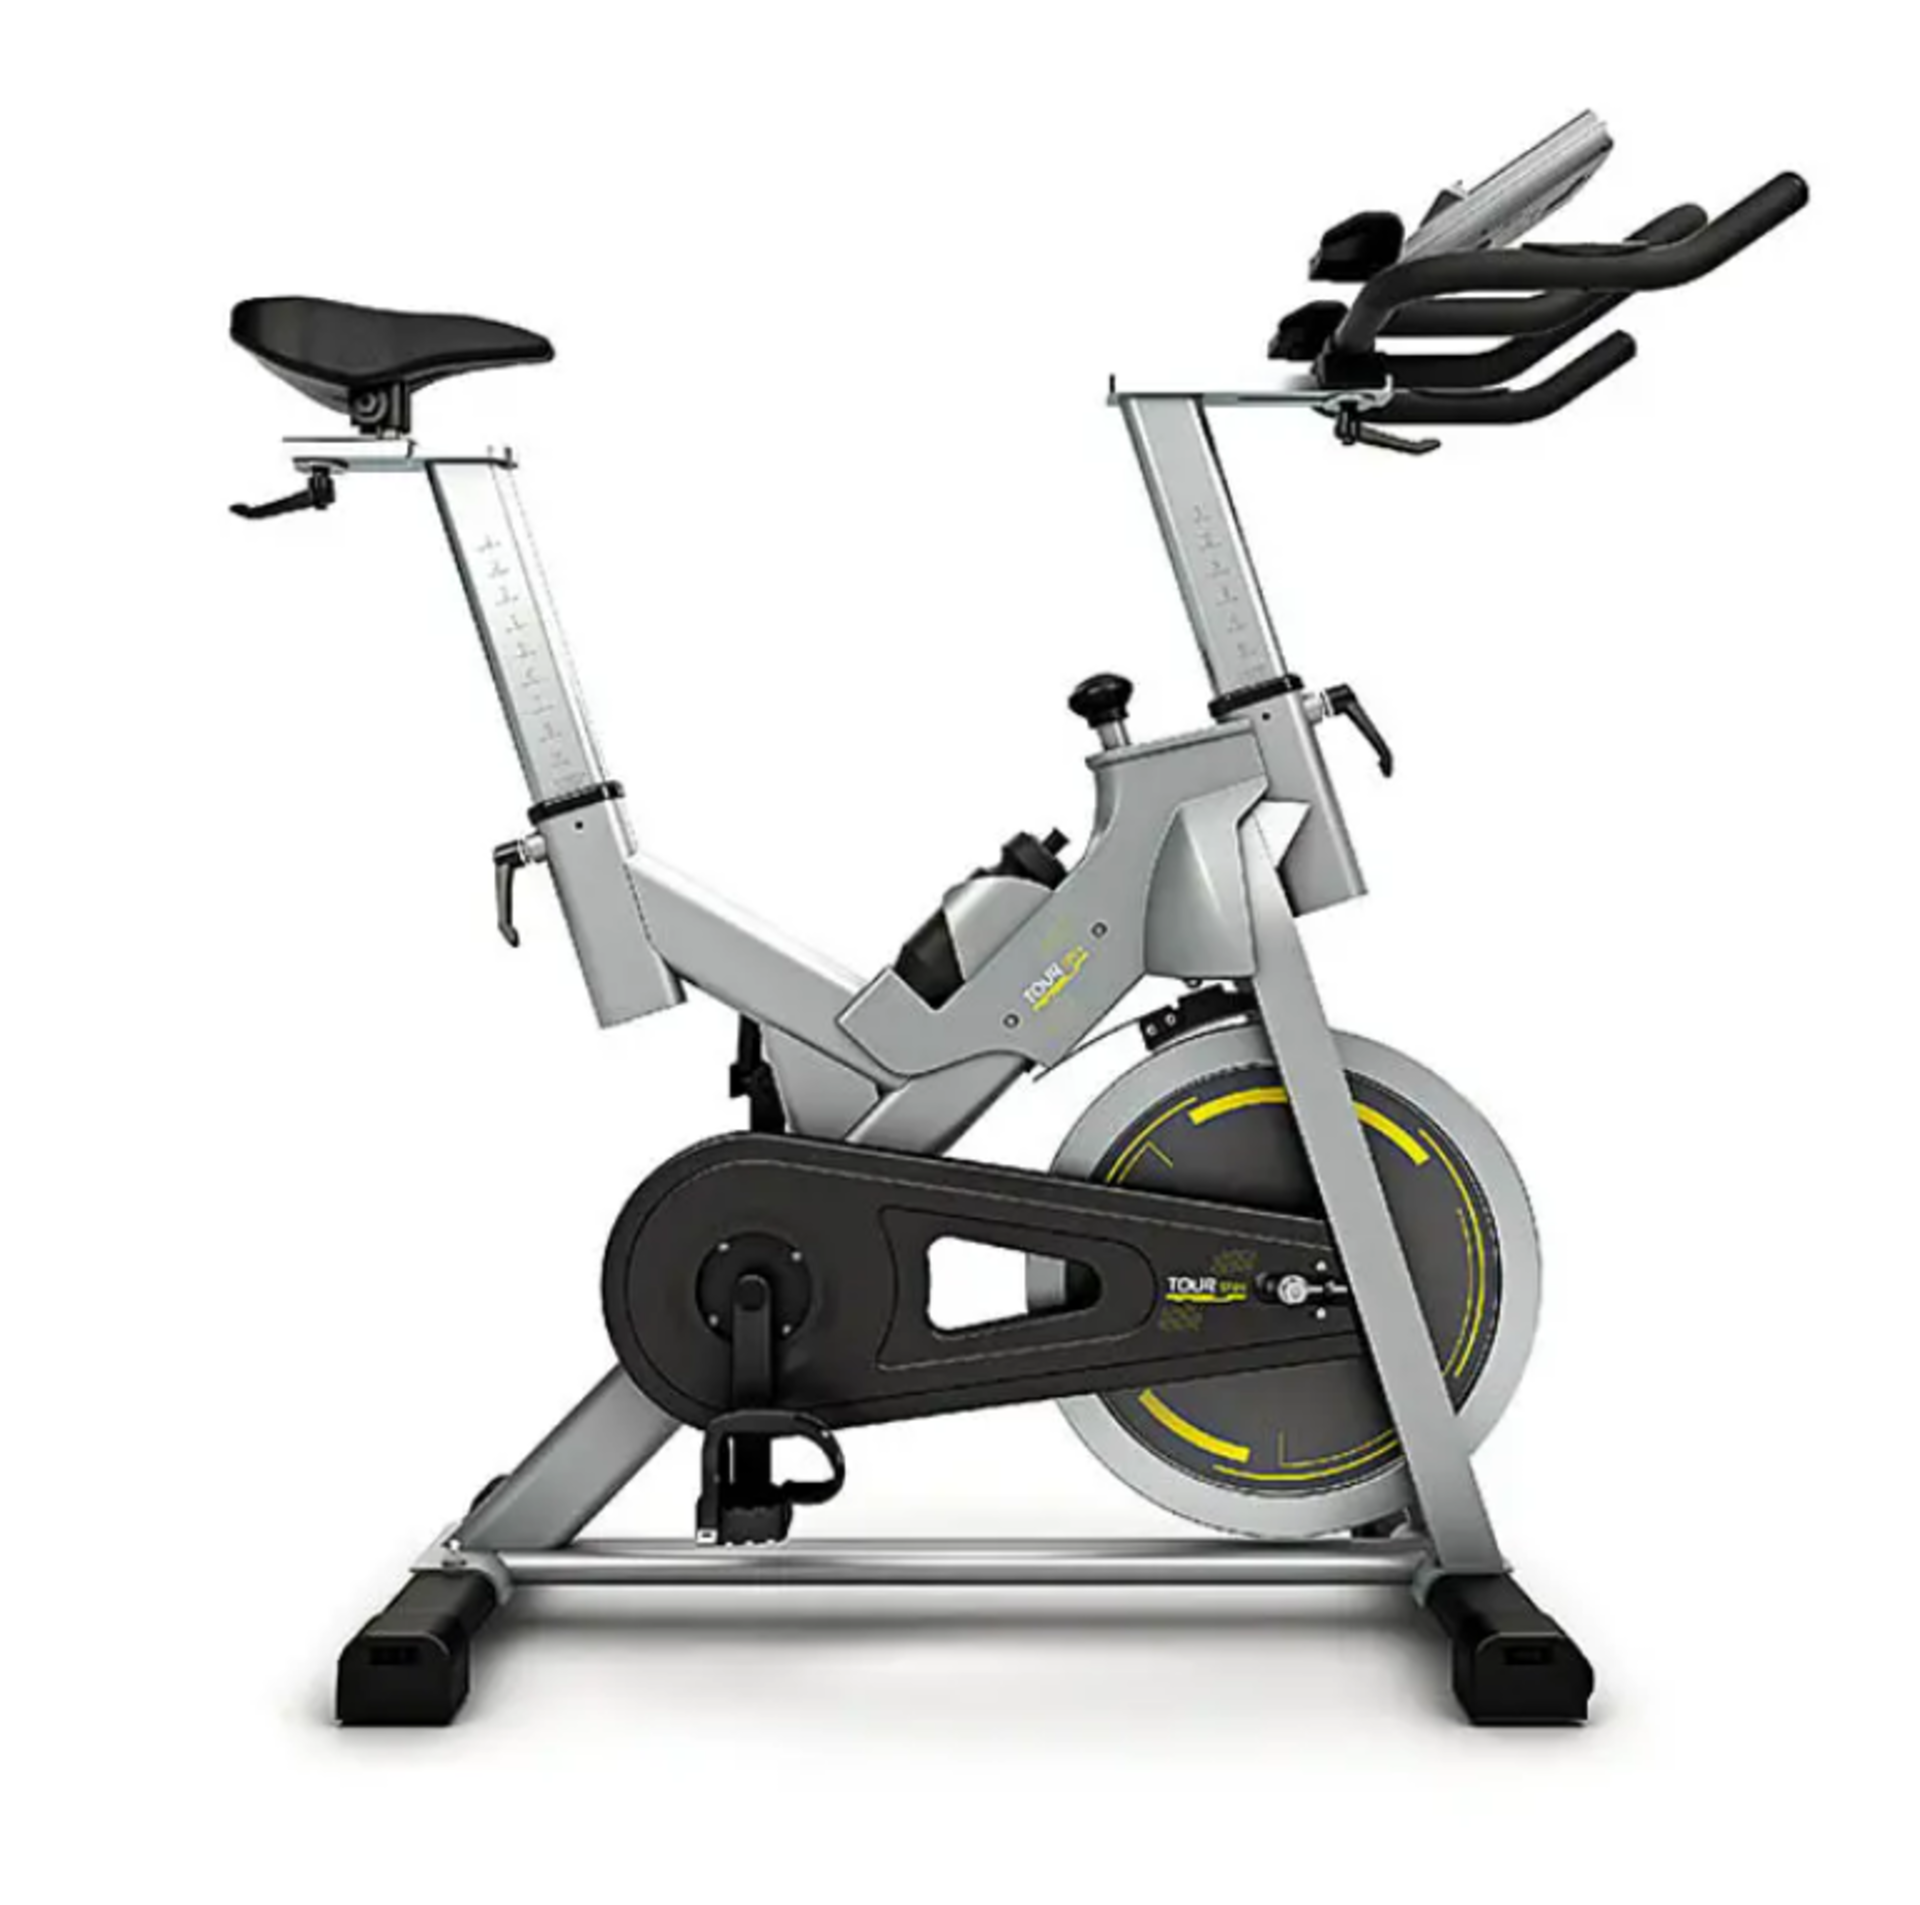 Bluefin Fitness Tour SP Bike with LCD Digital Fitness Console and Coaching App RRP œ199 in the Black